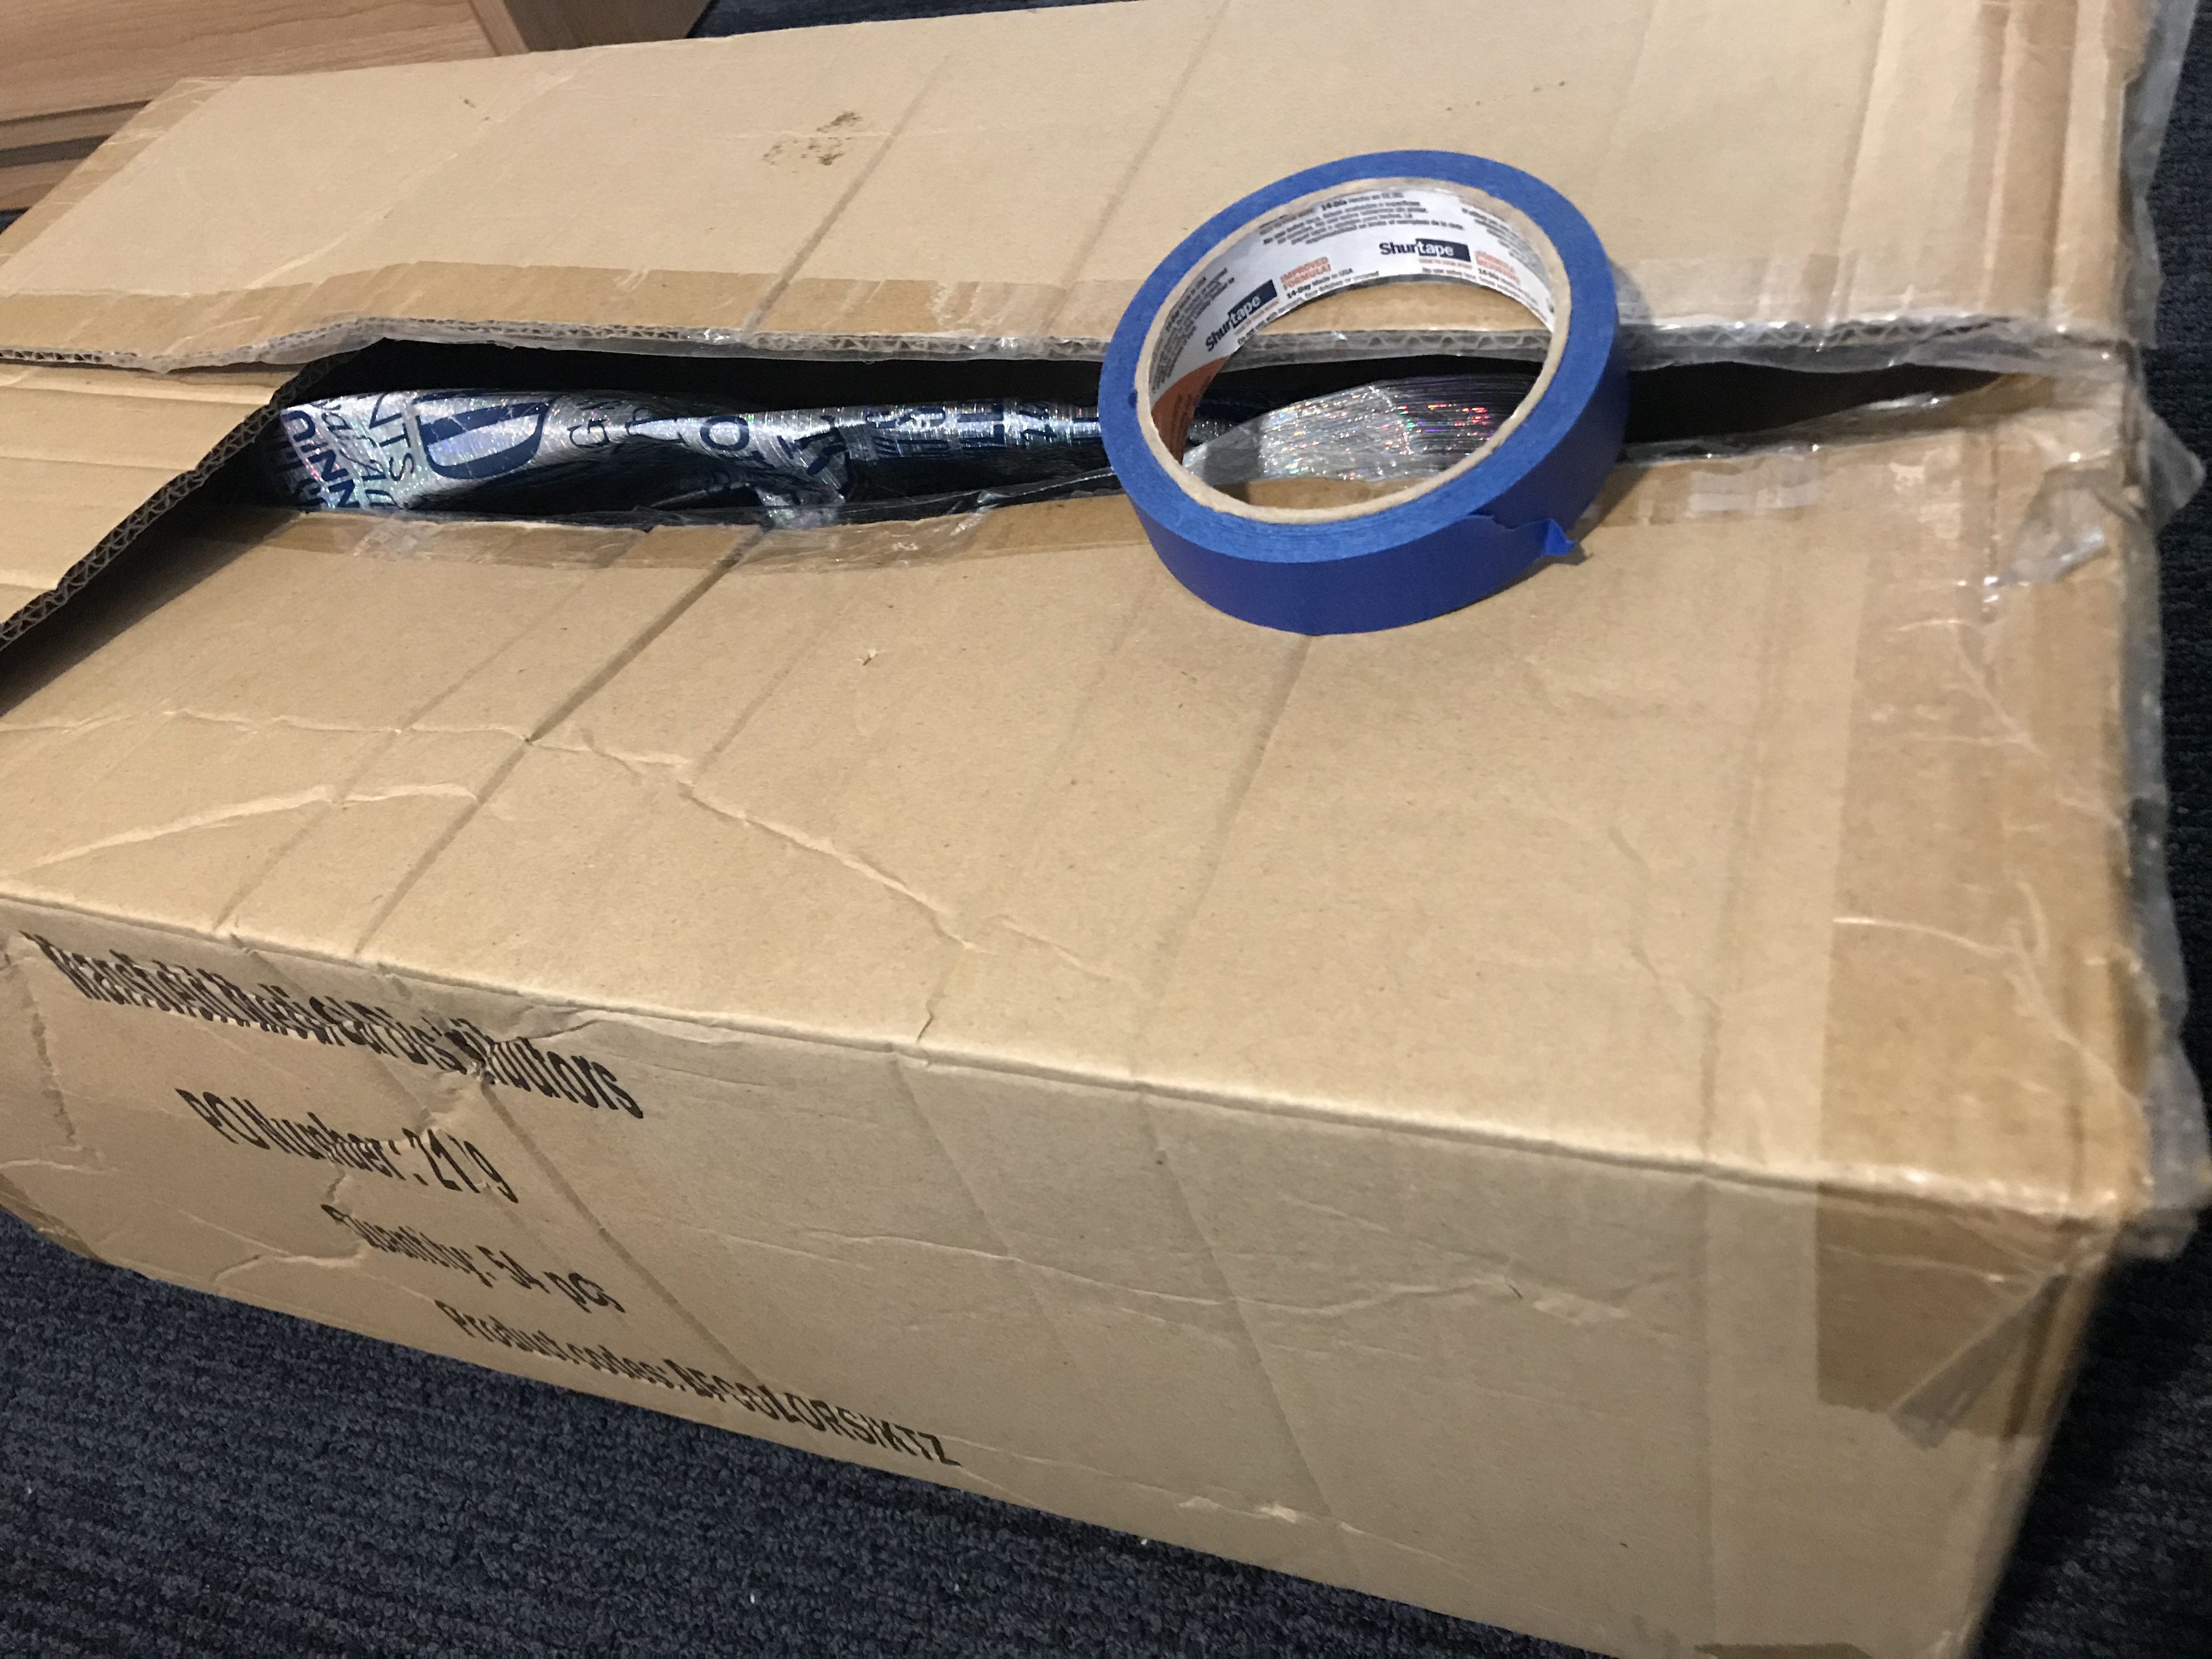 A photo of a box and tape